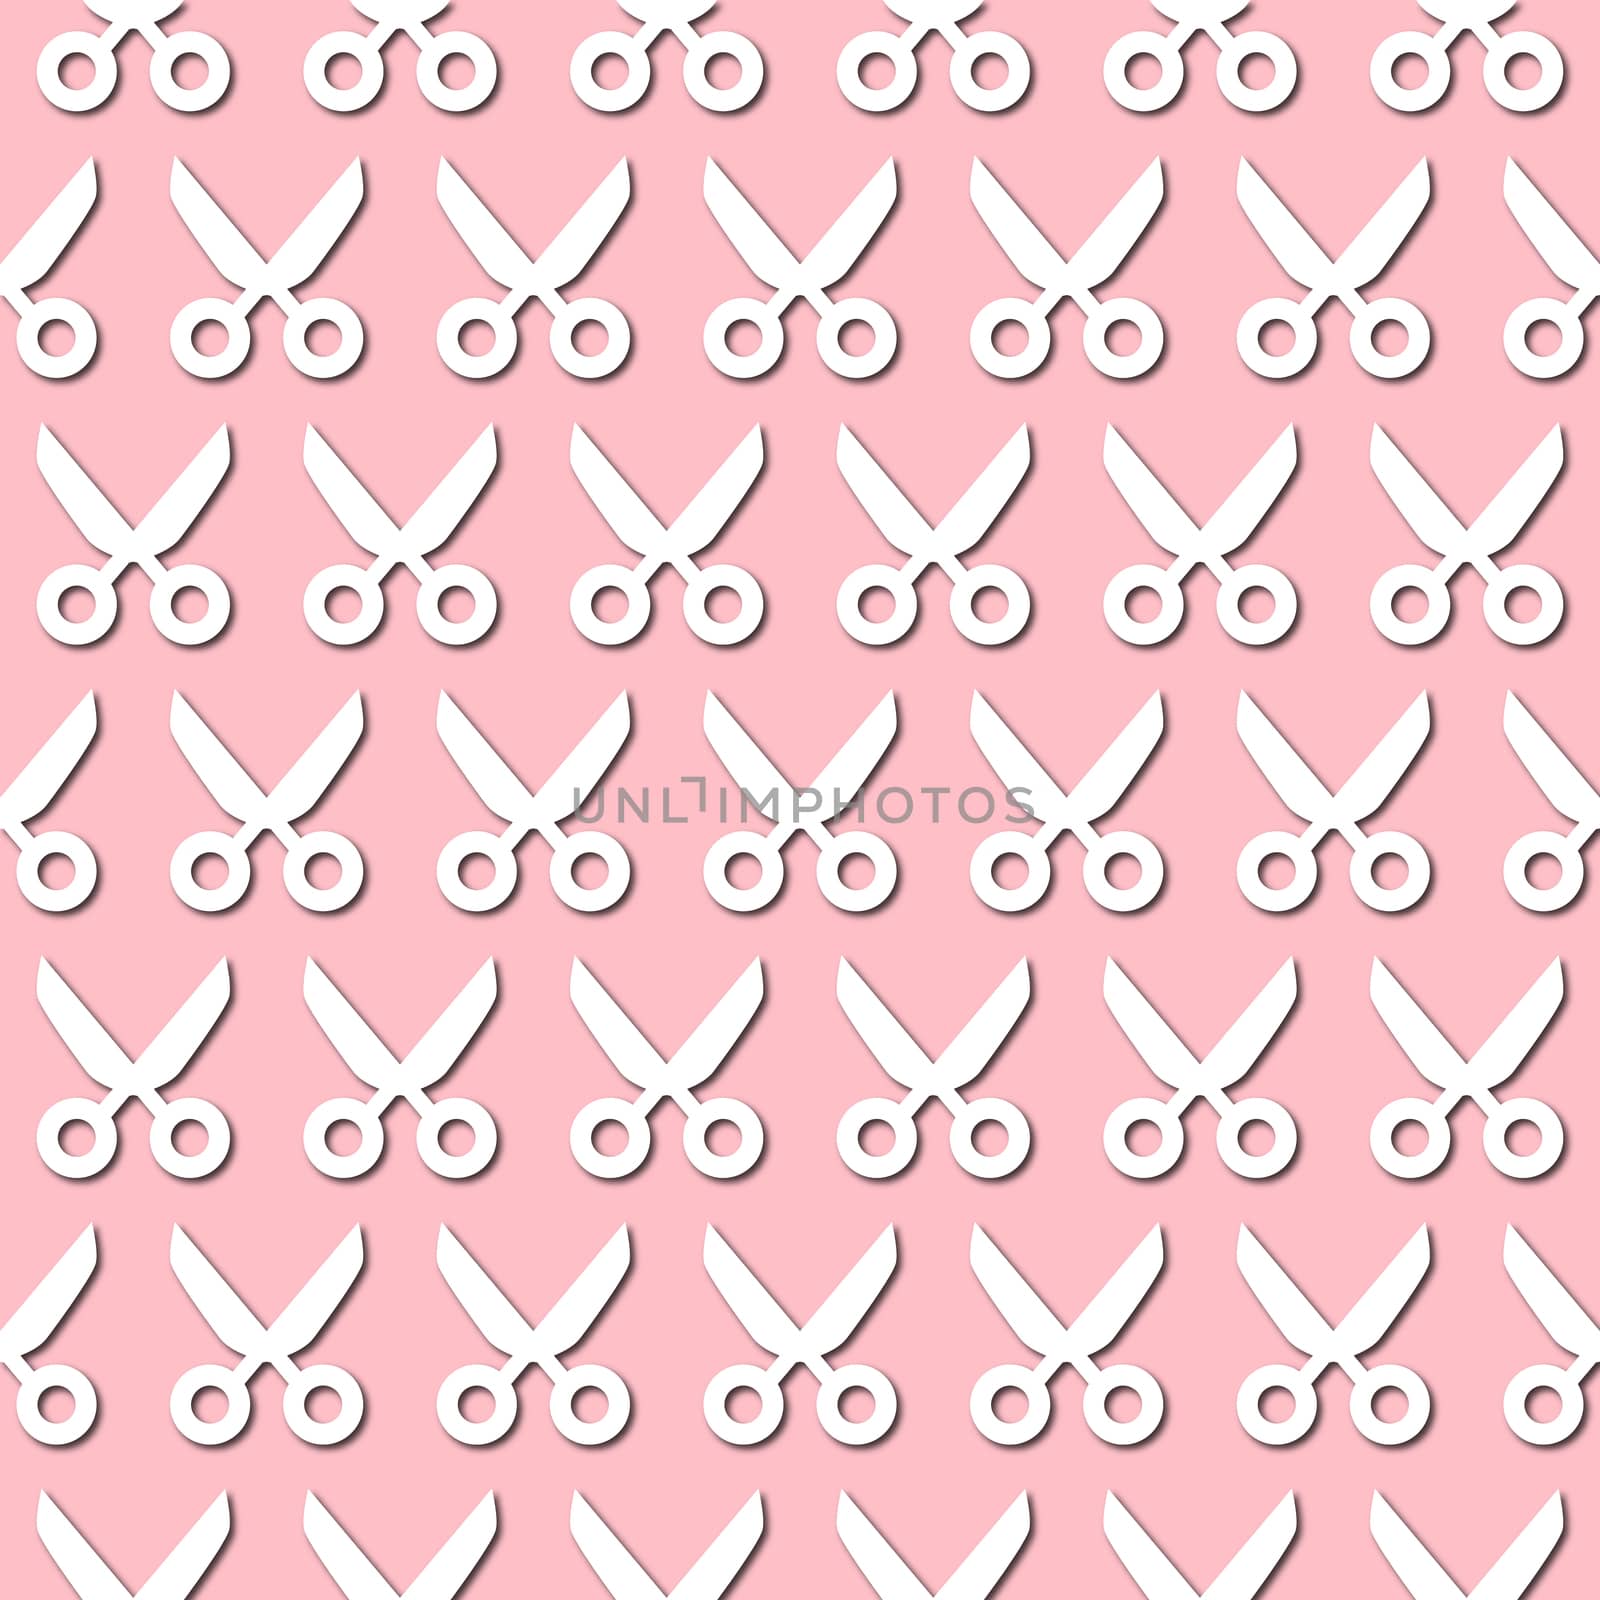 White scissors icon on pale pink background, seamless pattern. Paper cut style with drop shadows and highlights.